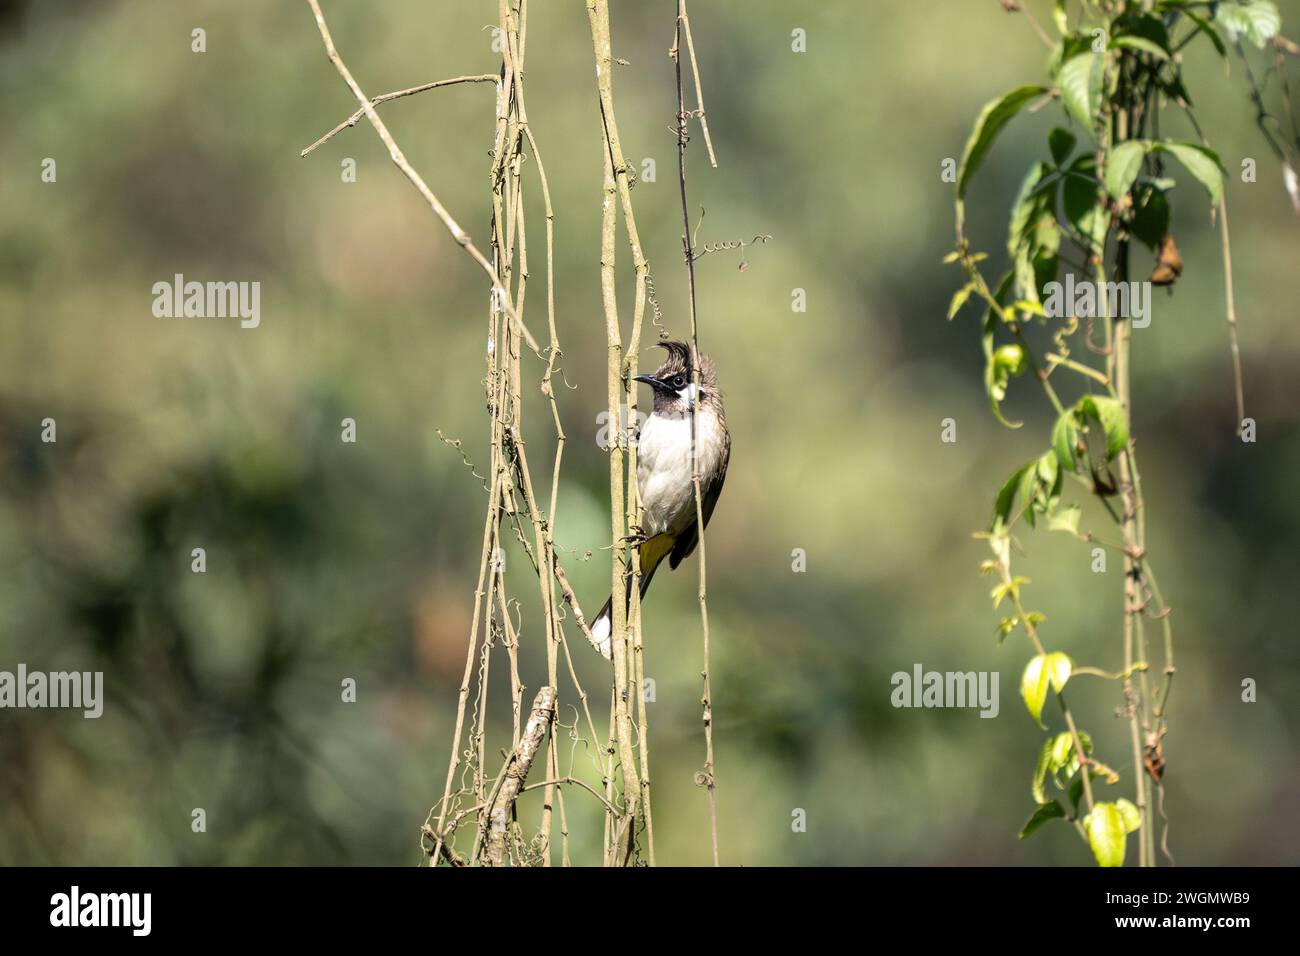 A Himalayan Bulbul perched on some Vines Stock Photo